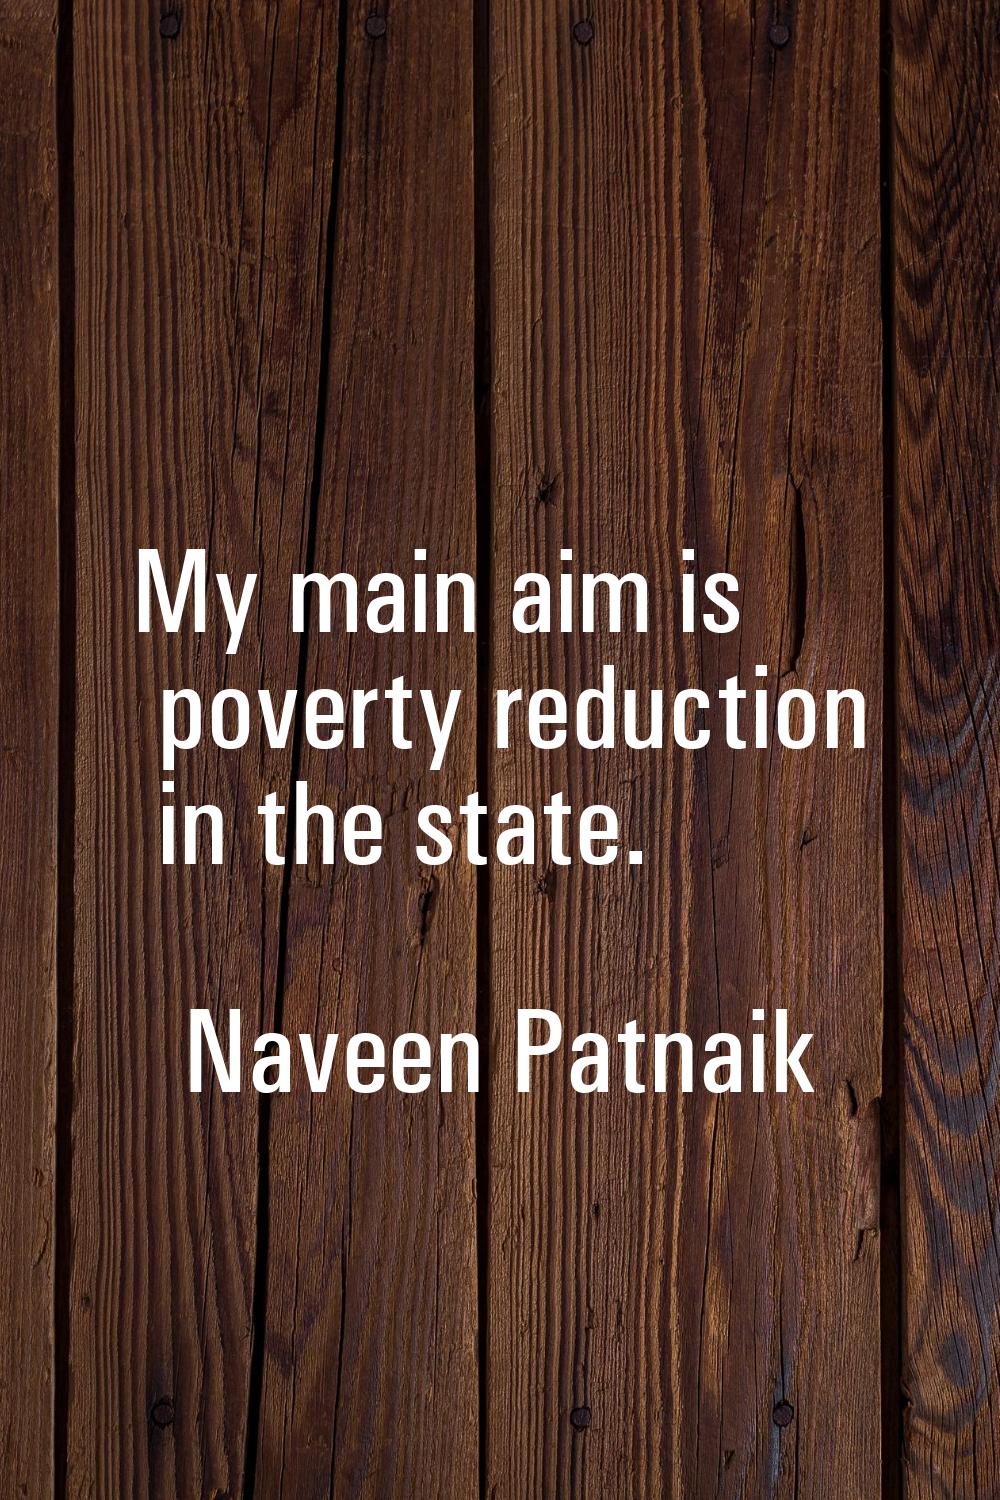 My main aim is poverty reduction in the state.